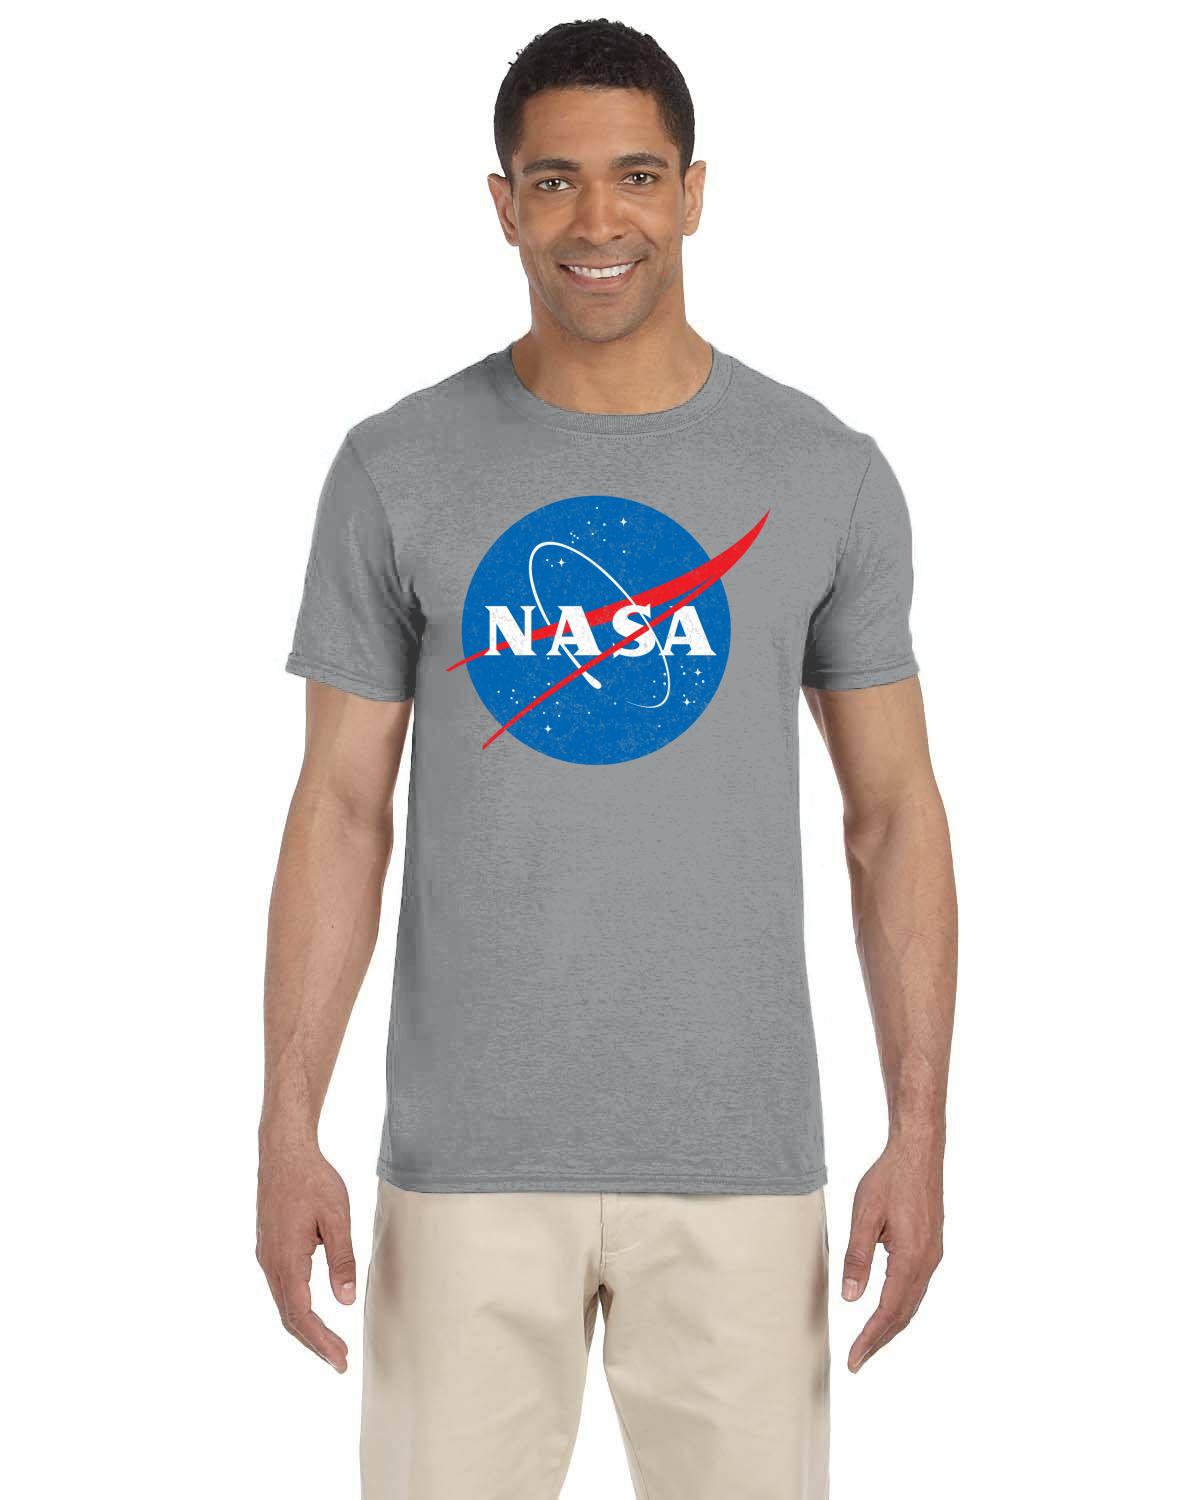 NASA Meatball Distressed Logo Men's T-Shirt: Official Space Agency Graphic Tee